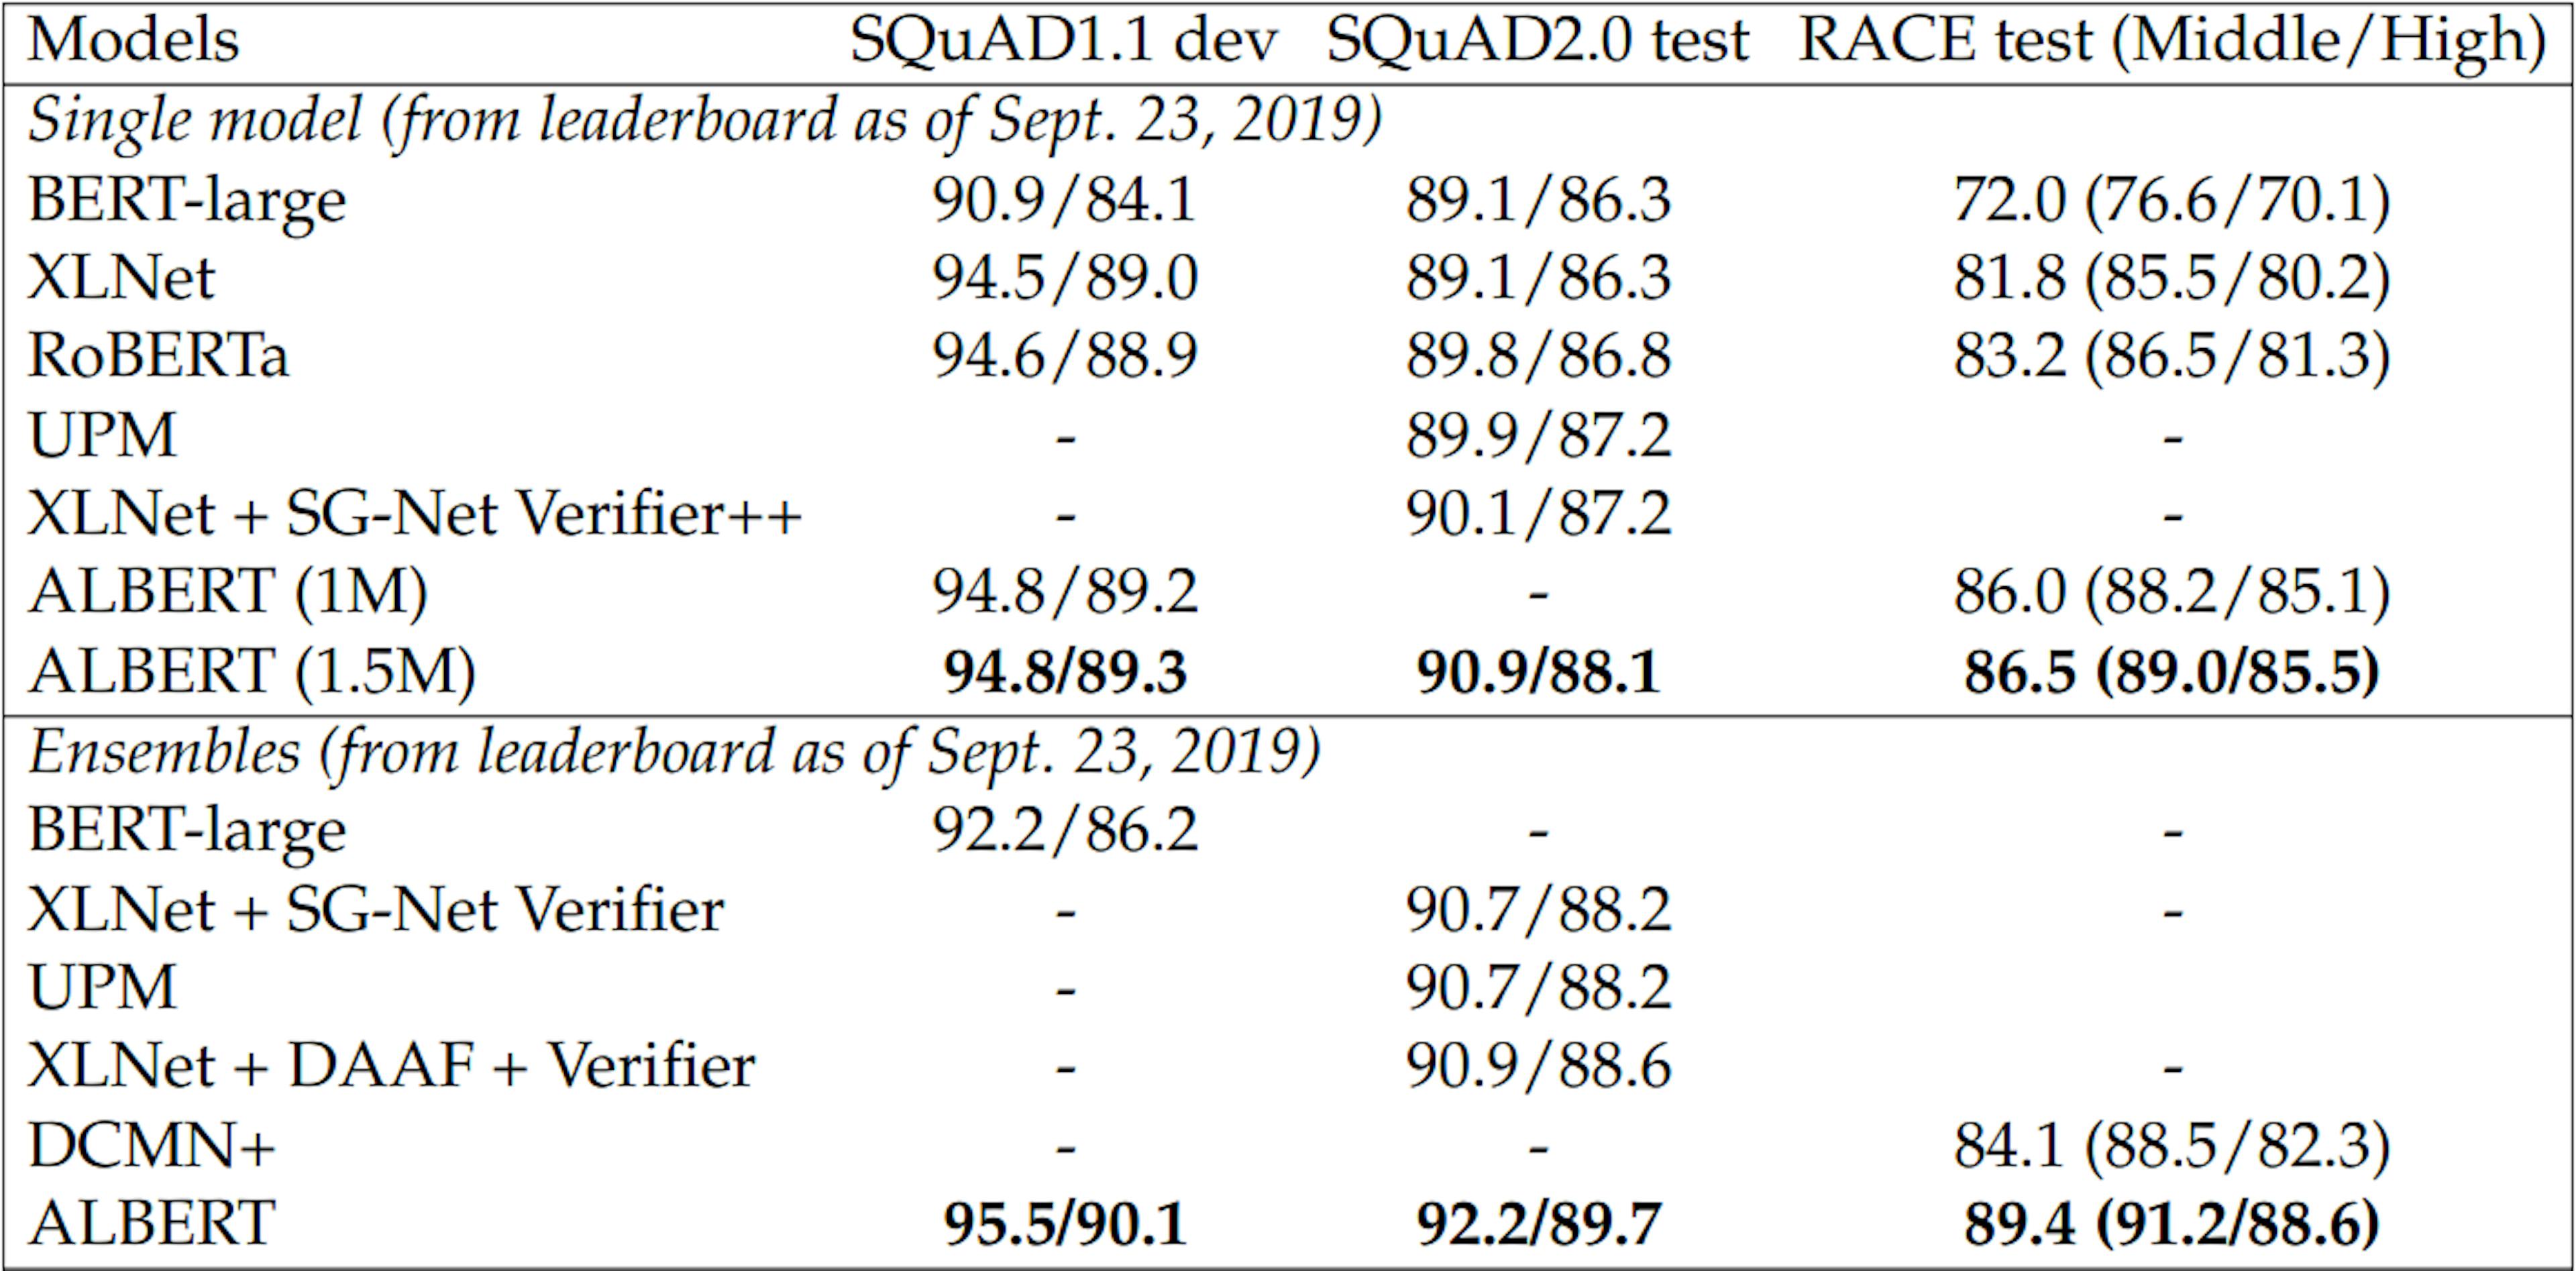 Table 3.4: Results for SQuAD and RACE.